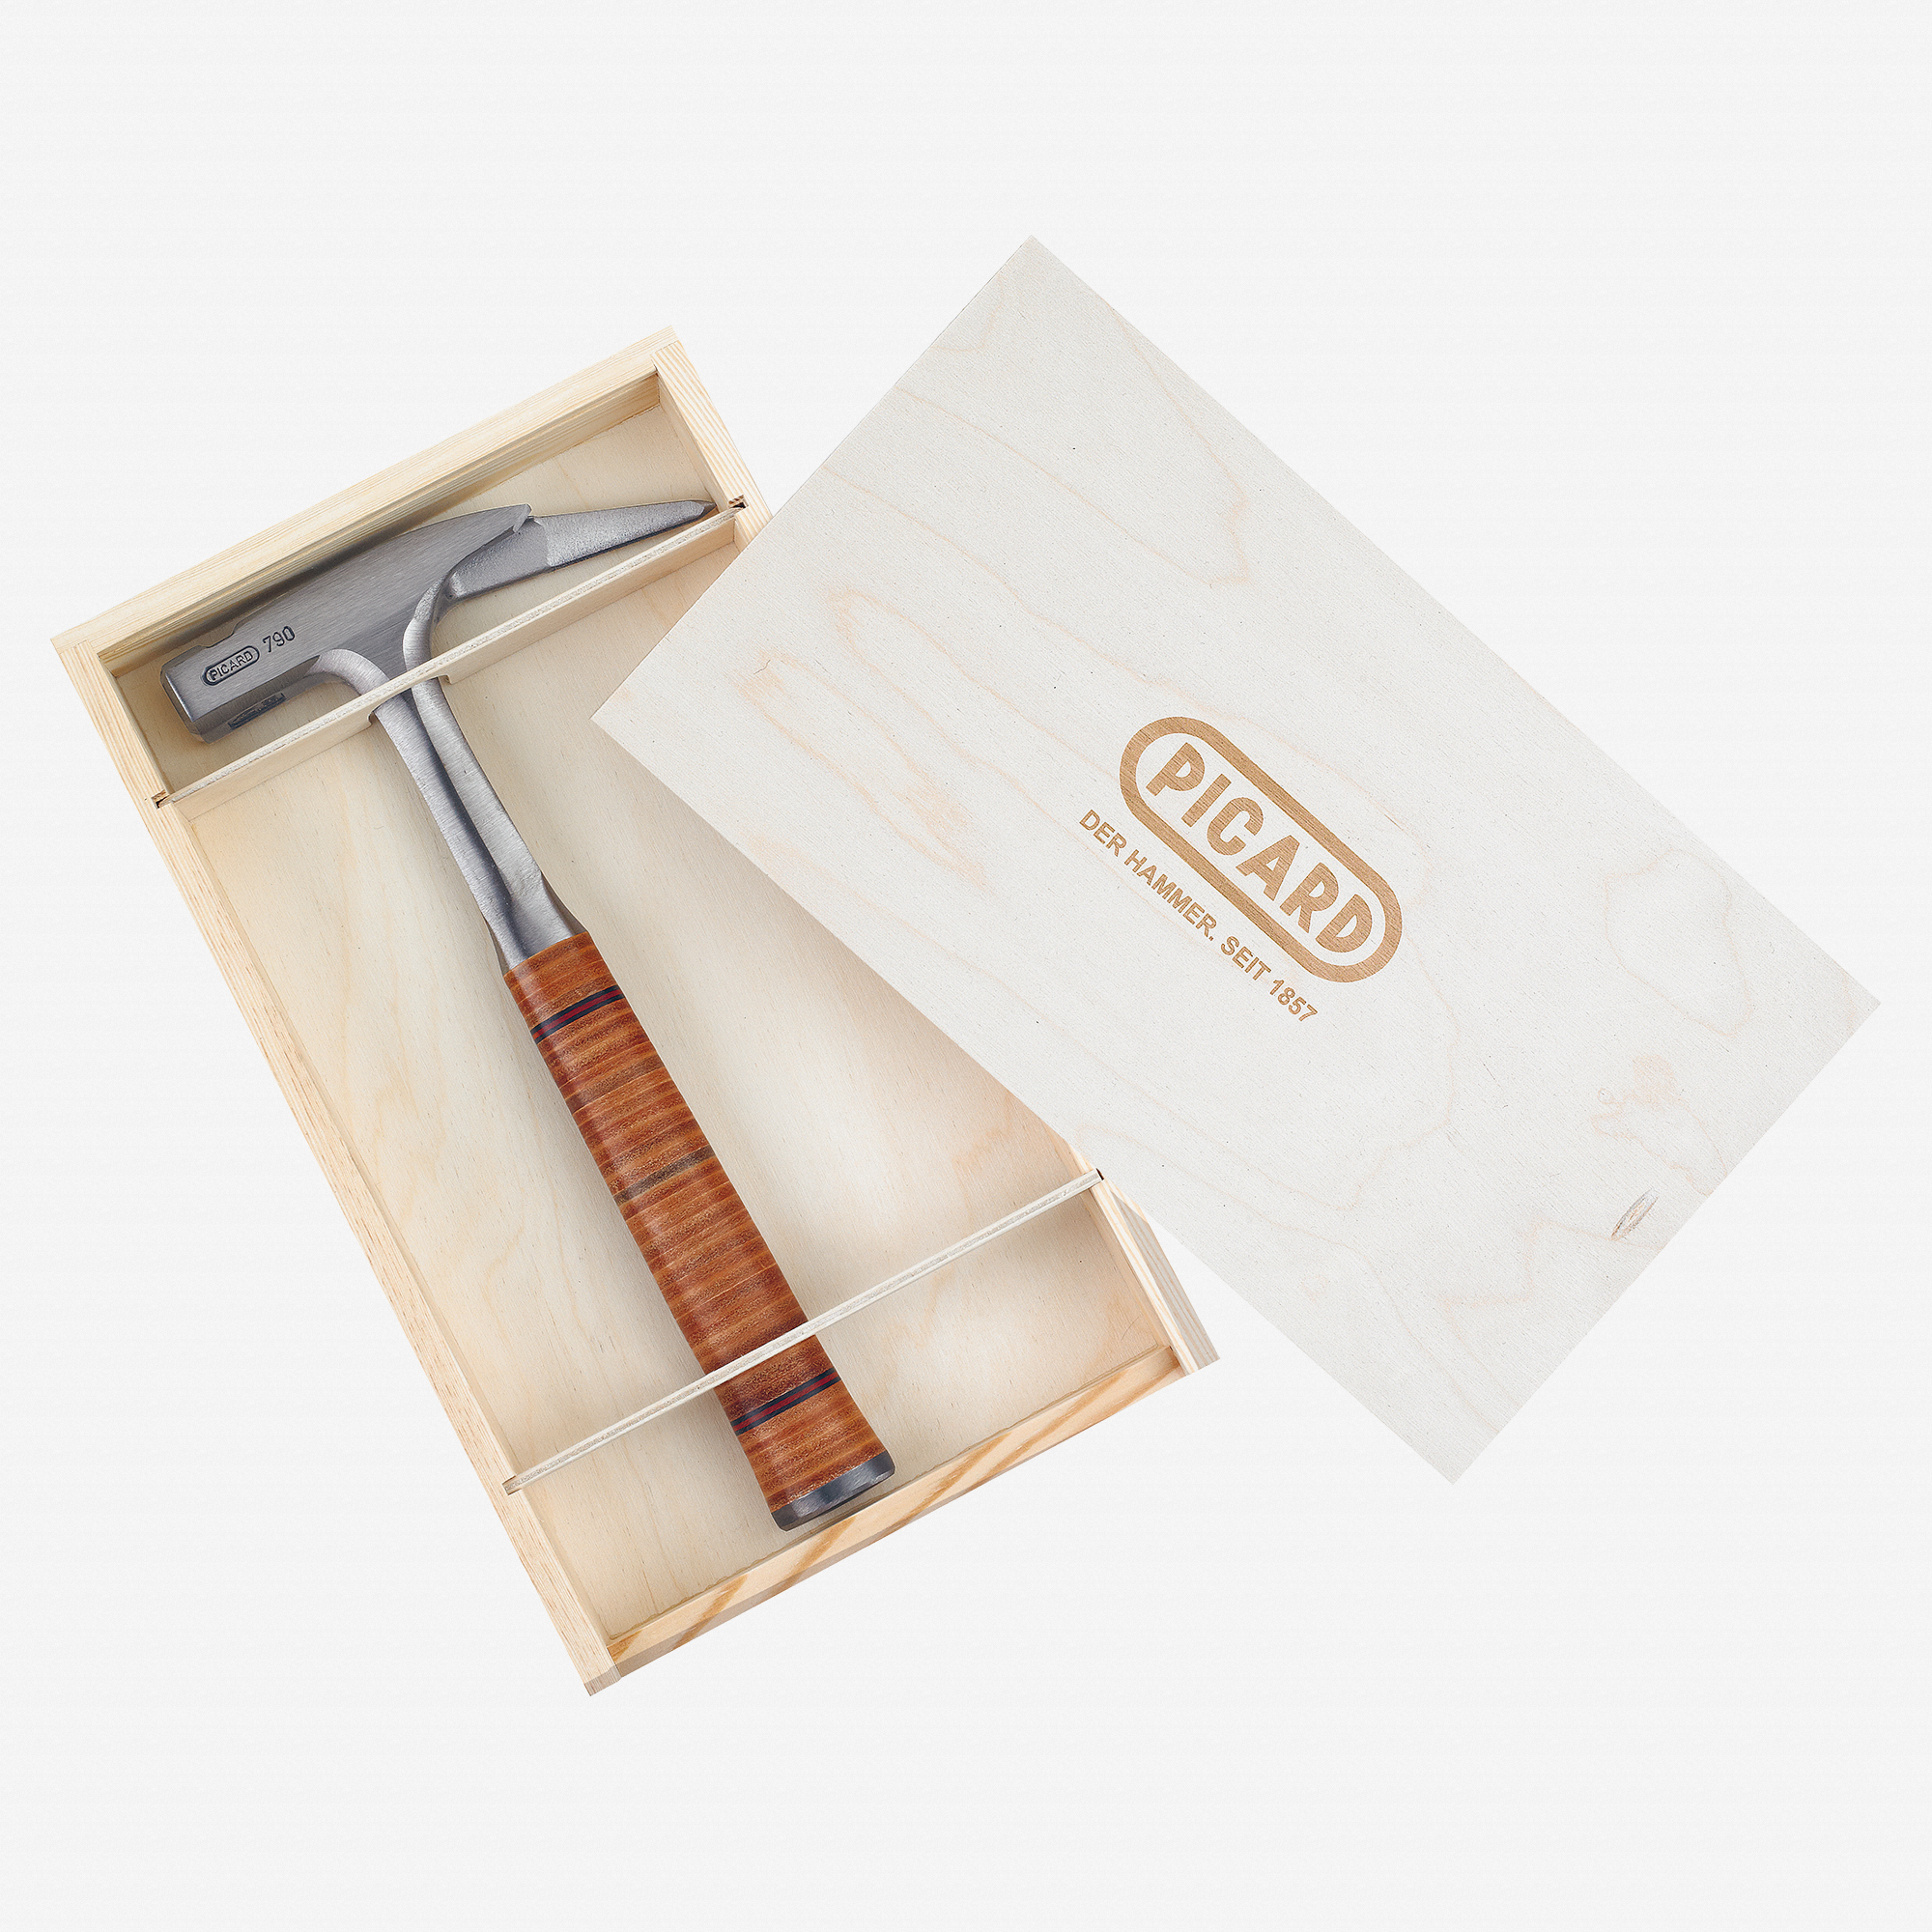 Picard 79000 Full-Steel Carpenters' Roofing Hammer with Gift Box - KC Tool